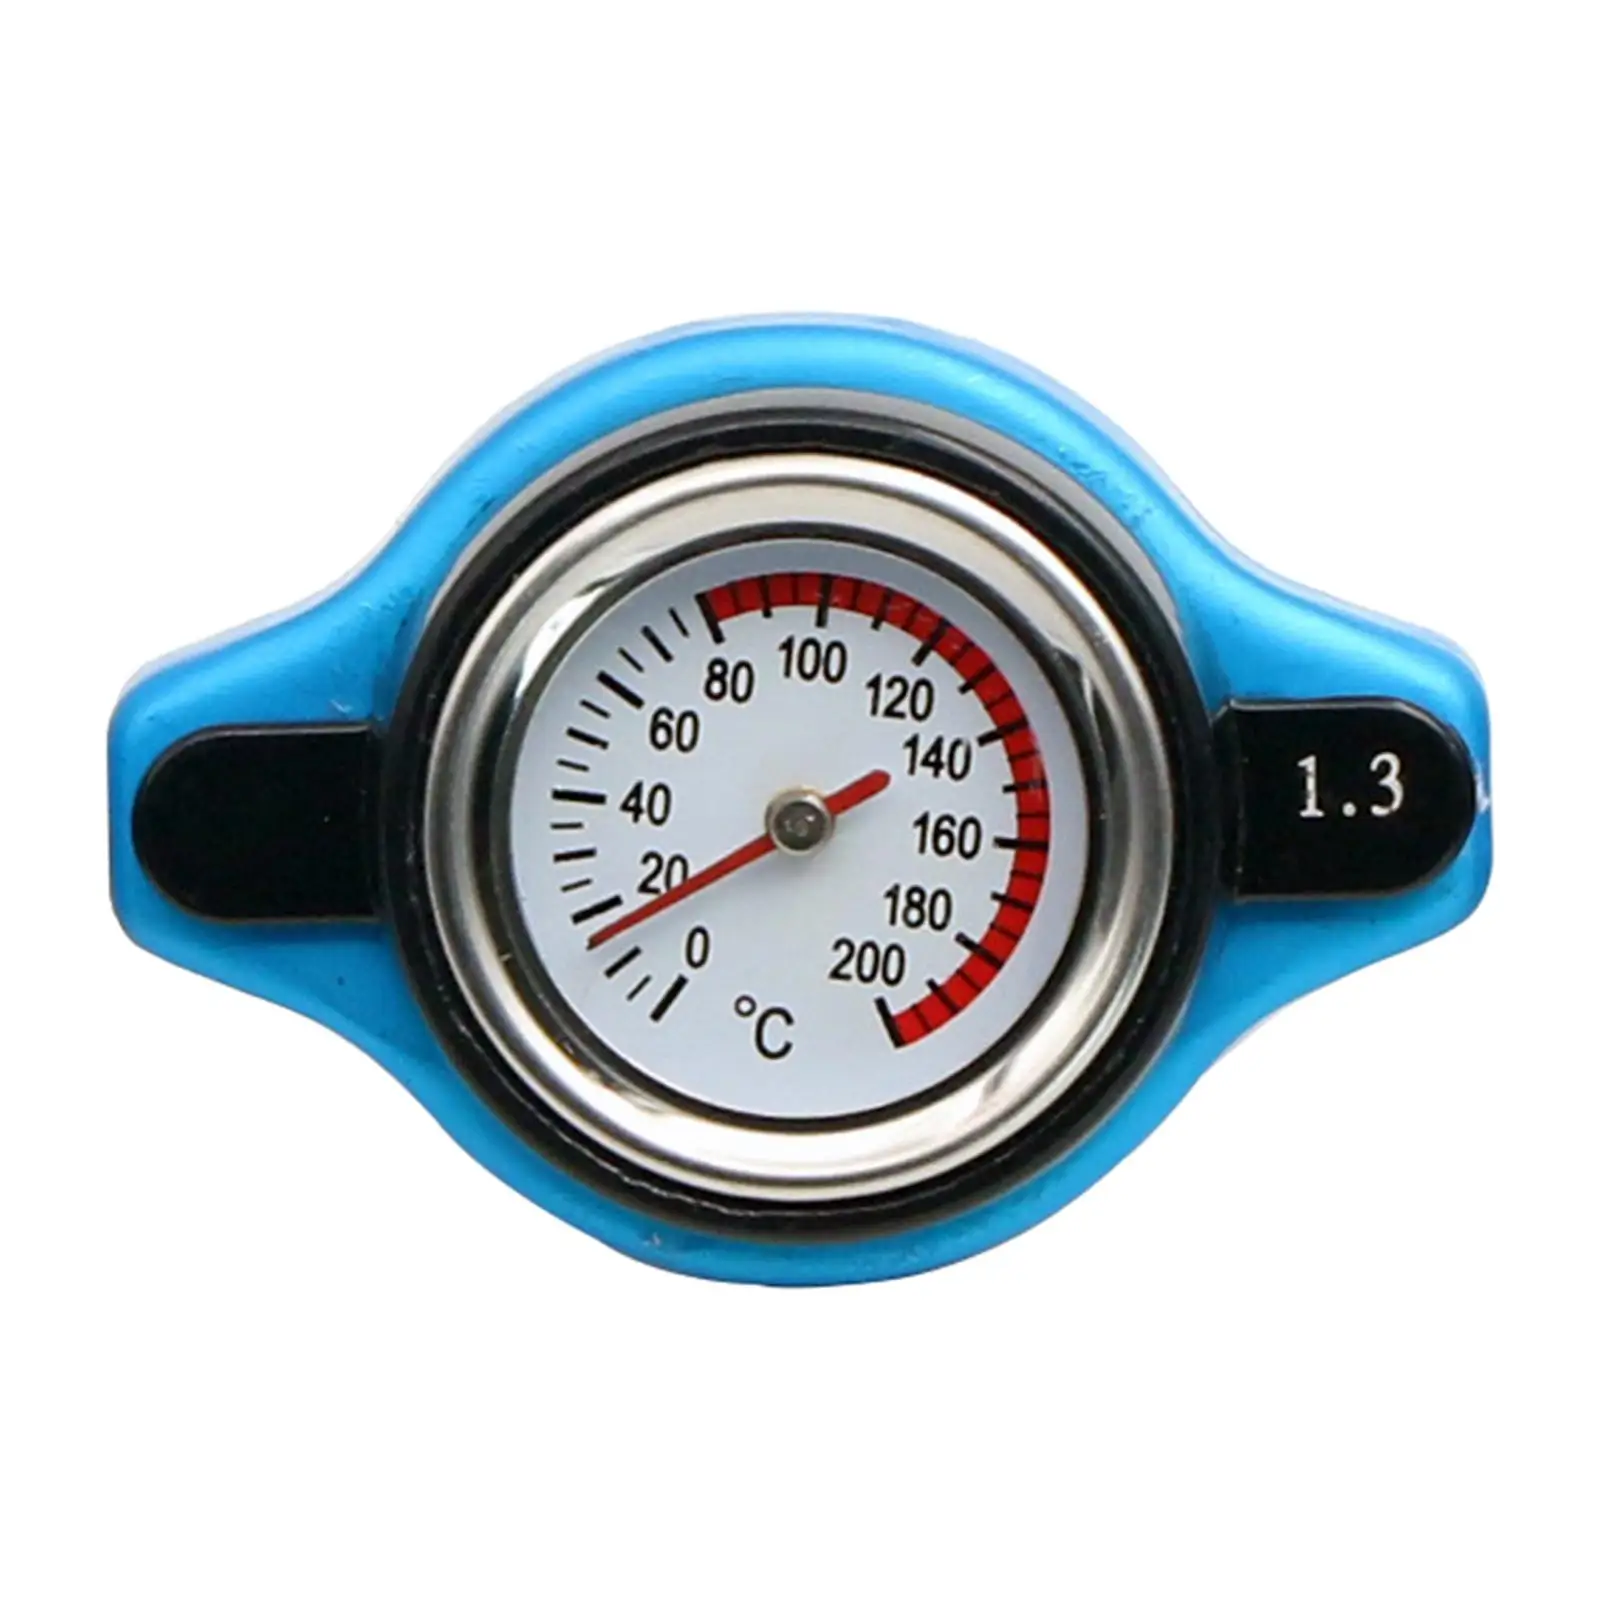 Thermostatic Radiator Cap Water Temp Gauge Meter High Quality Easy to Install Auto Part Sturdy Aluminum Alloy Universal Replace